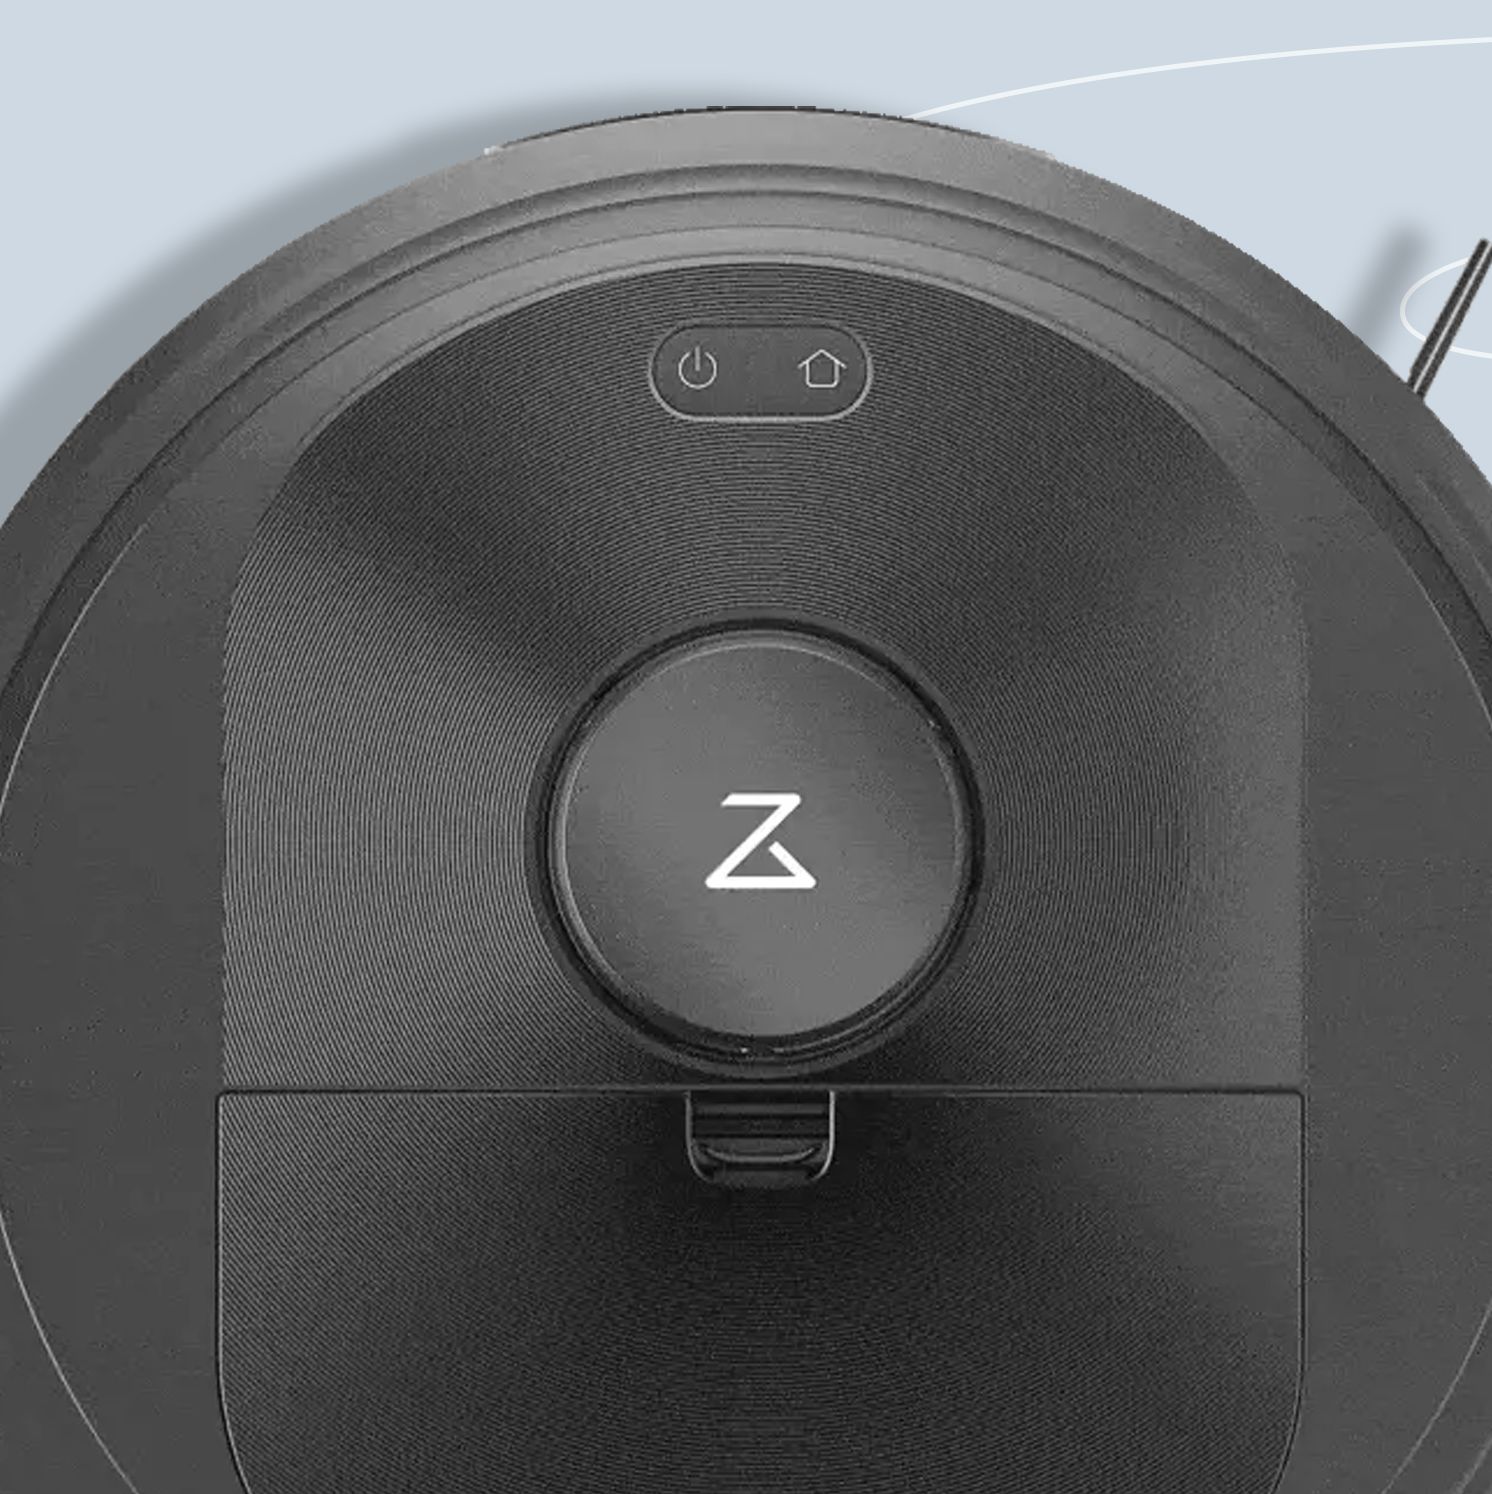 5 Robot Vacuums That Do All the Work For You